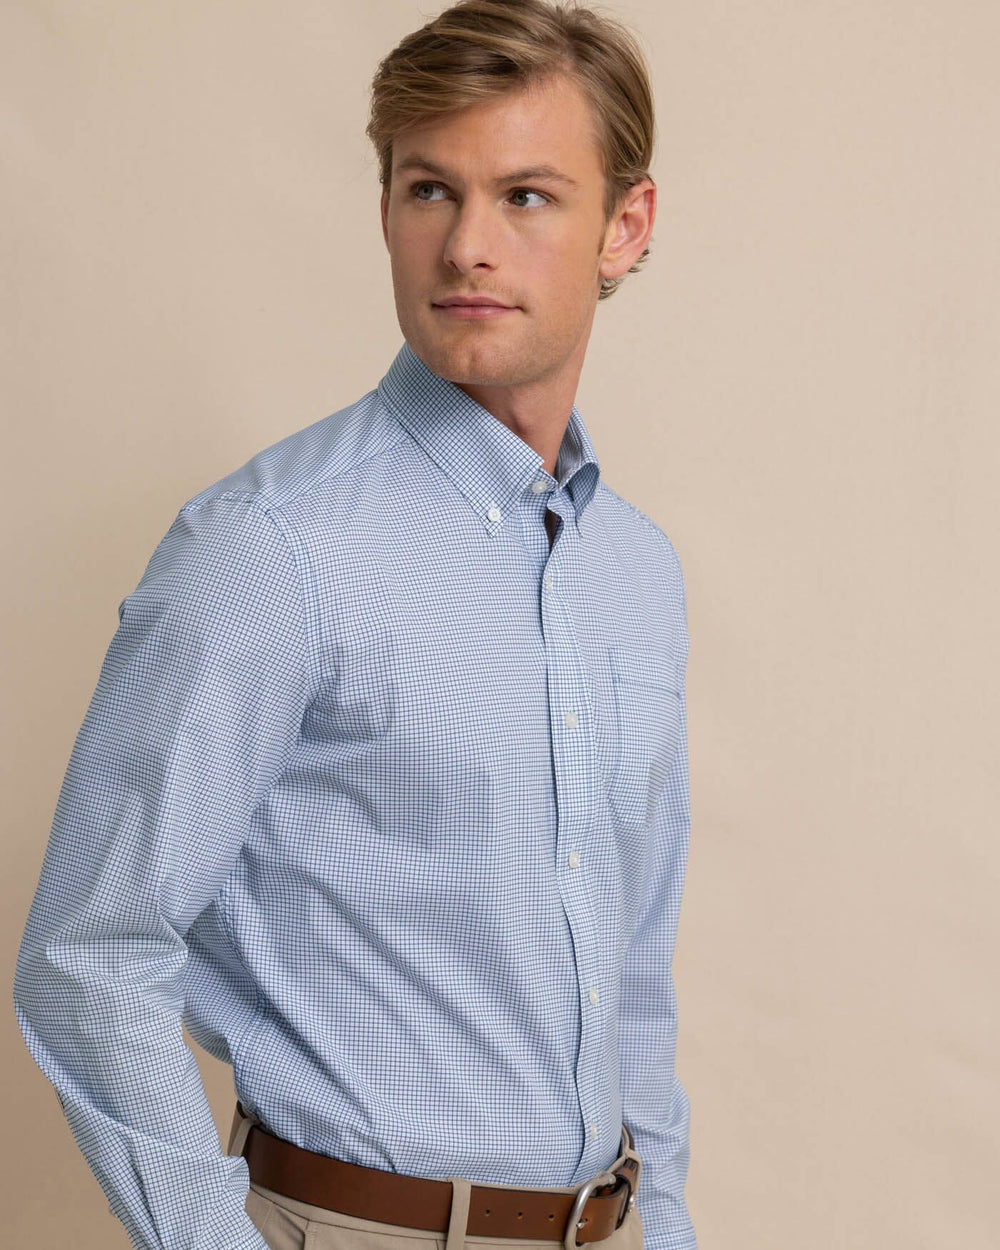 The front view of the Men's Rosemont Brrr® Intercoastal Performance Sport Shirt by Southern Tide - Seven Seas Blue